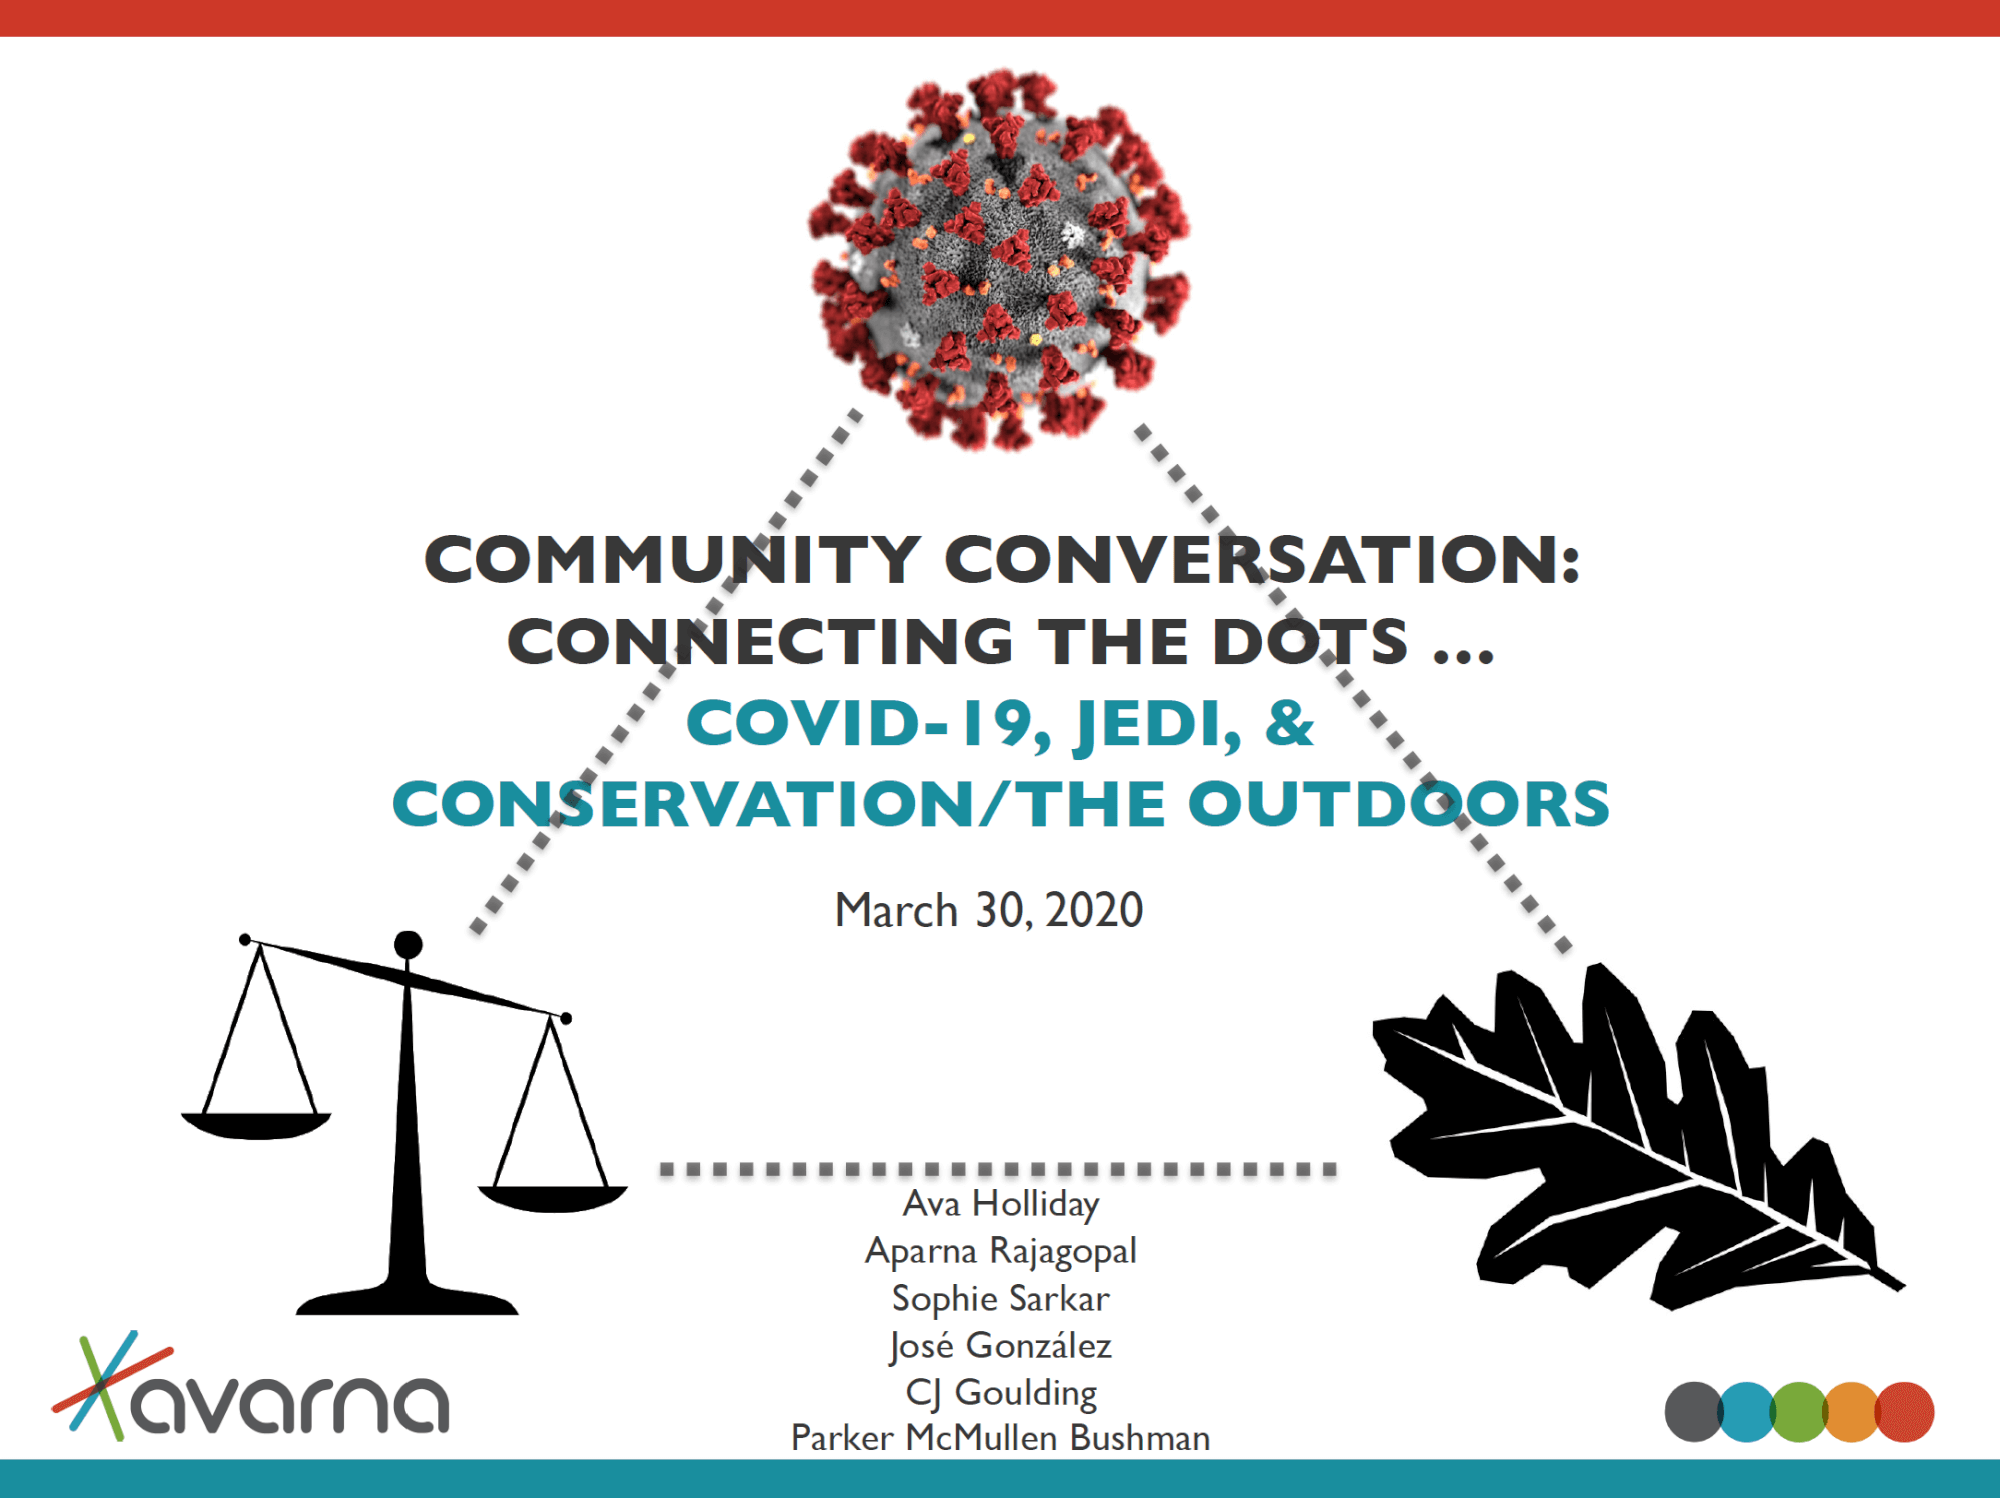 an introductory slide from a presentation that says, "Community conversation: Connecting the dots. COVID-19, JEDI, & Conservation/The Outdoors"